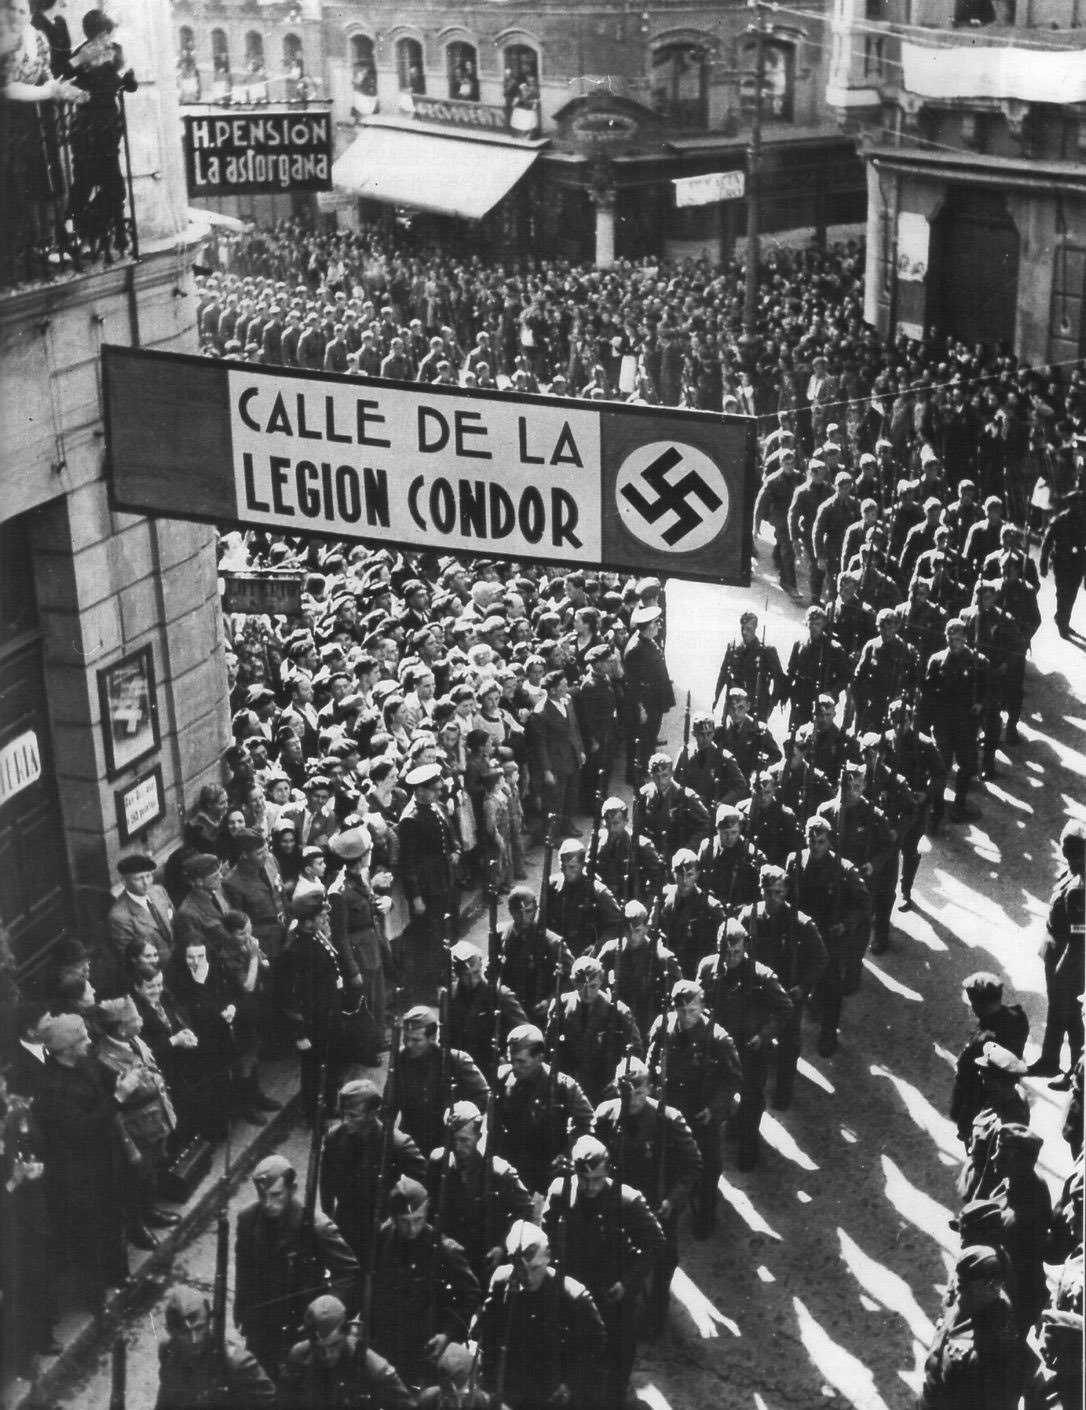 German forces arrive to assist the Nationalists in the Spanish Civil War in 1936.